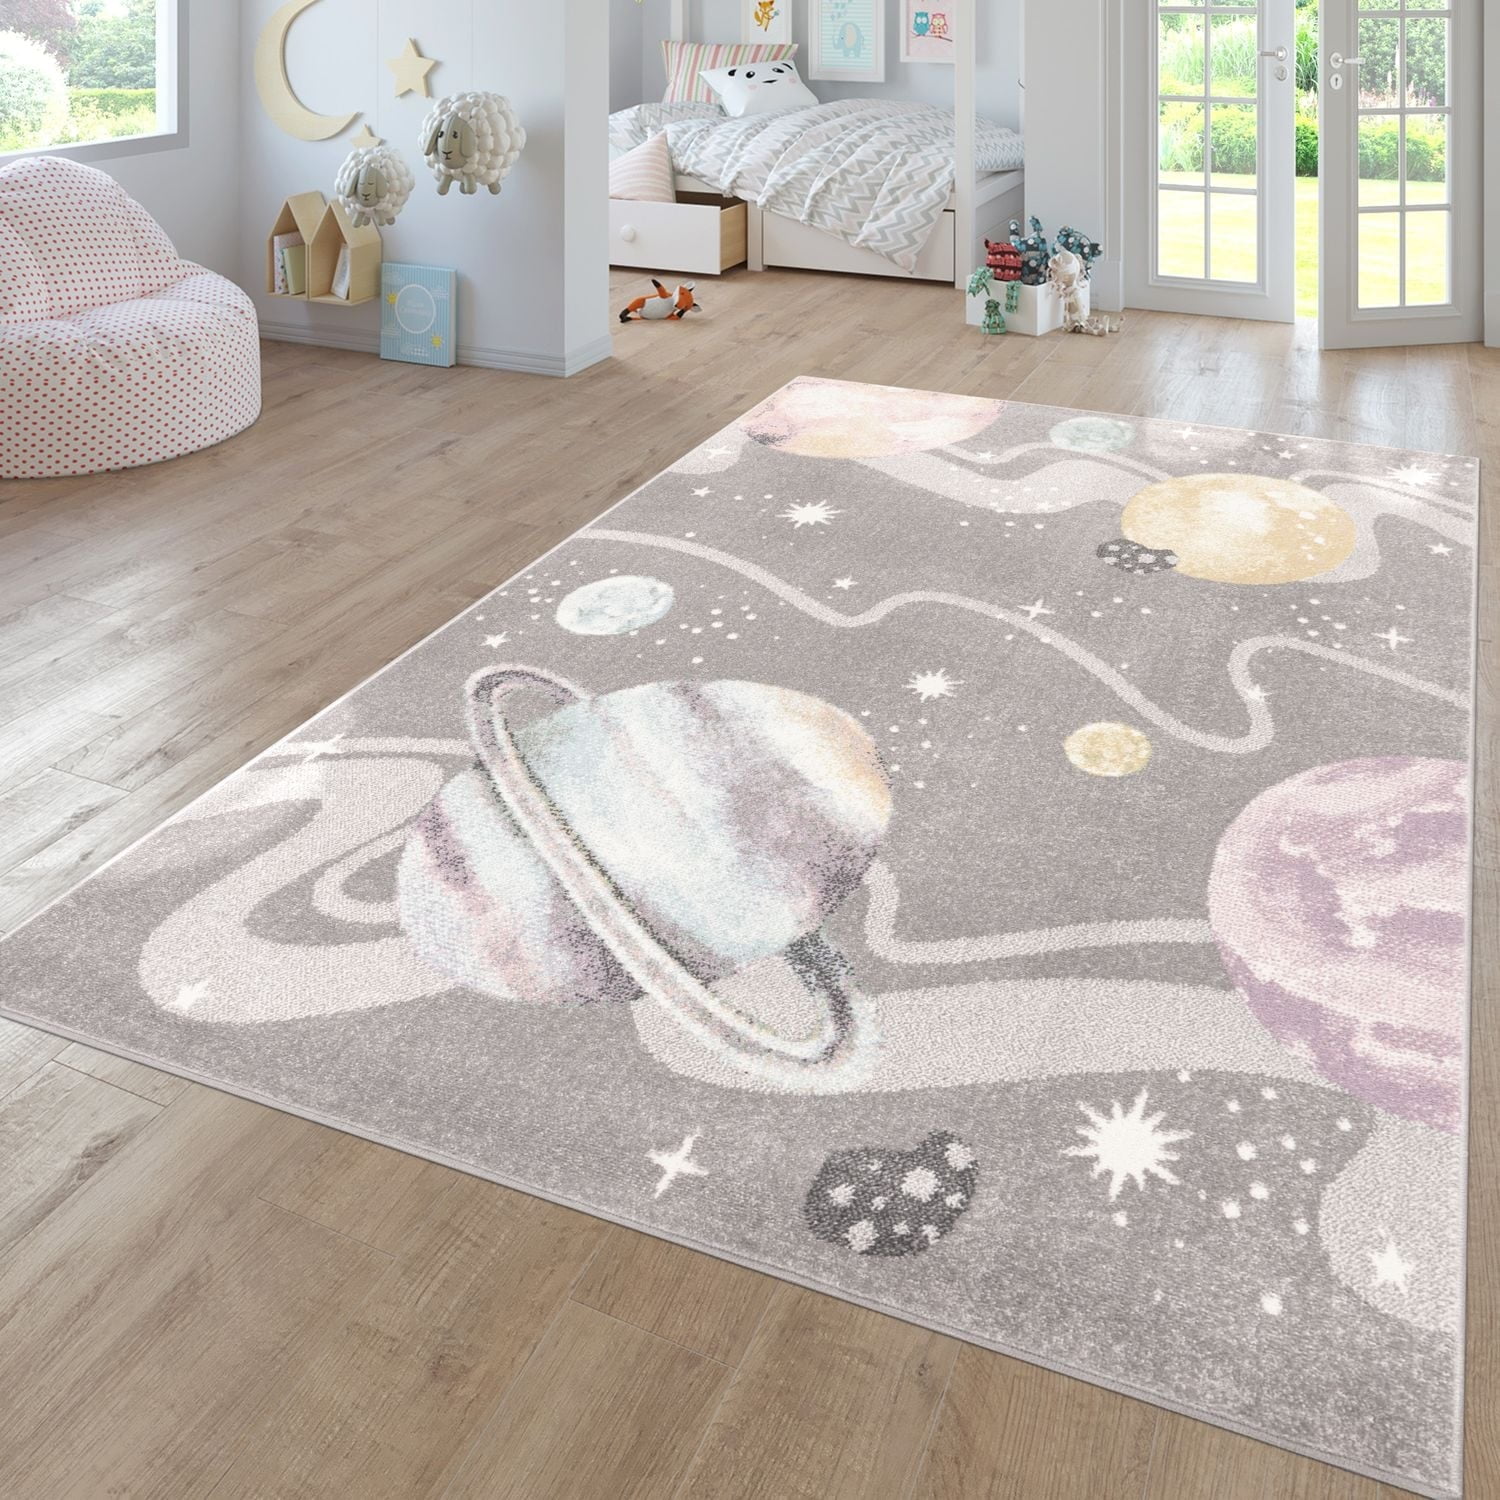 Paco Home Kids Rug Space with Planets and Stars in Pastel Colors - Grey - 4'4 x 6'3